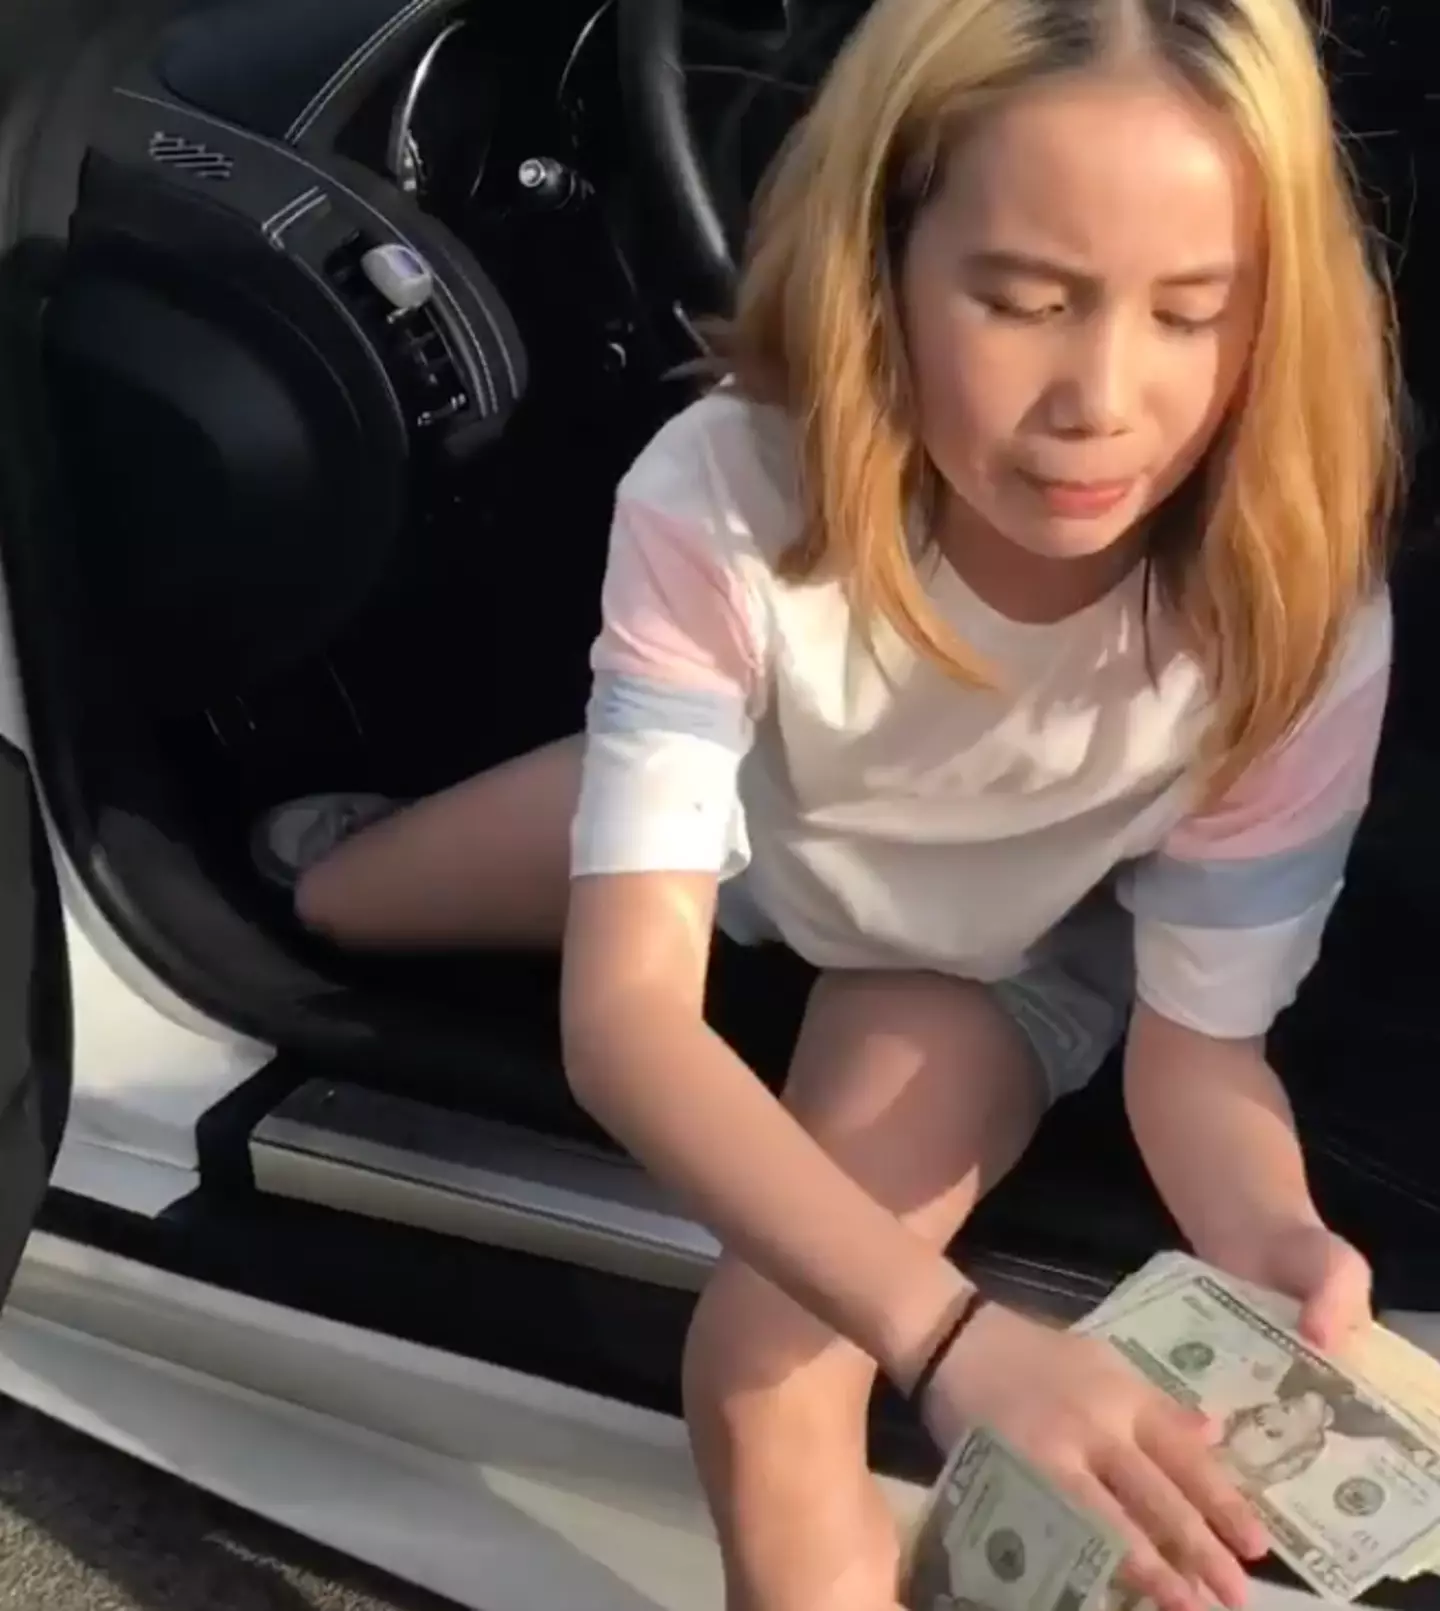 Lil Tay rose to fame around the age of nine, flashing the cash on social media.